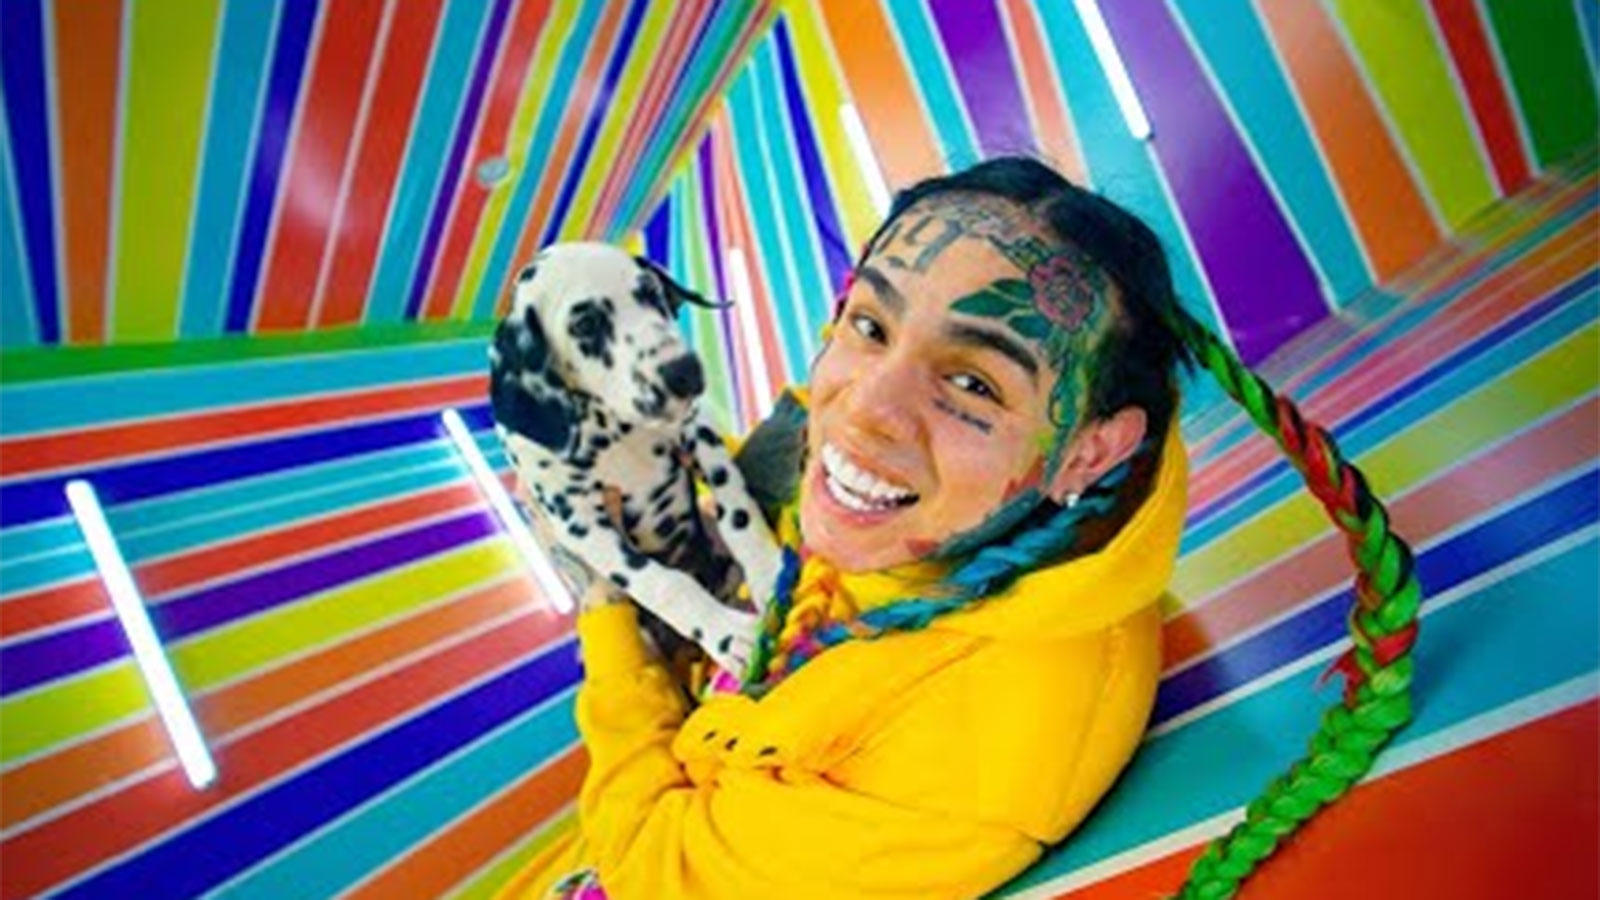 Check Out Latest English Trending Music Video Song Gooba Sung By 6ix9ine English Video Songs Times Of India